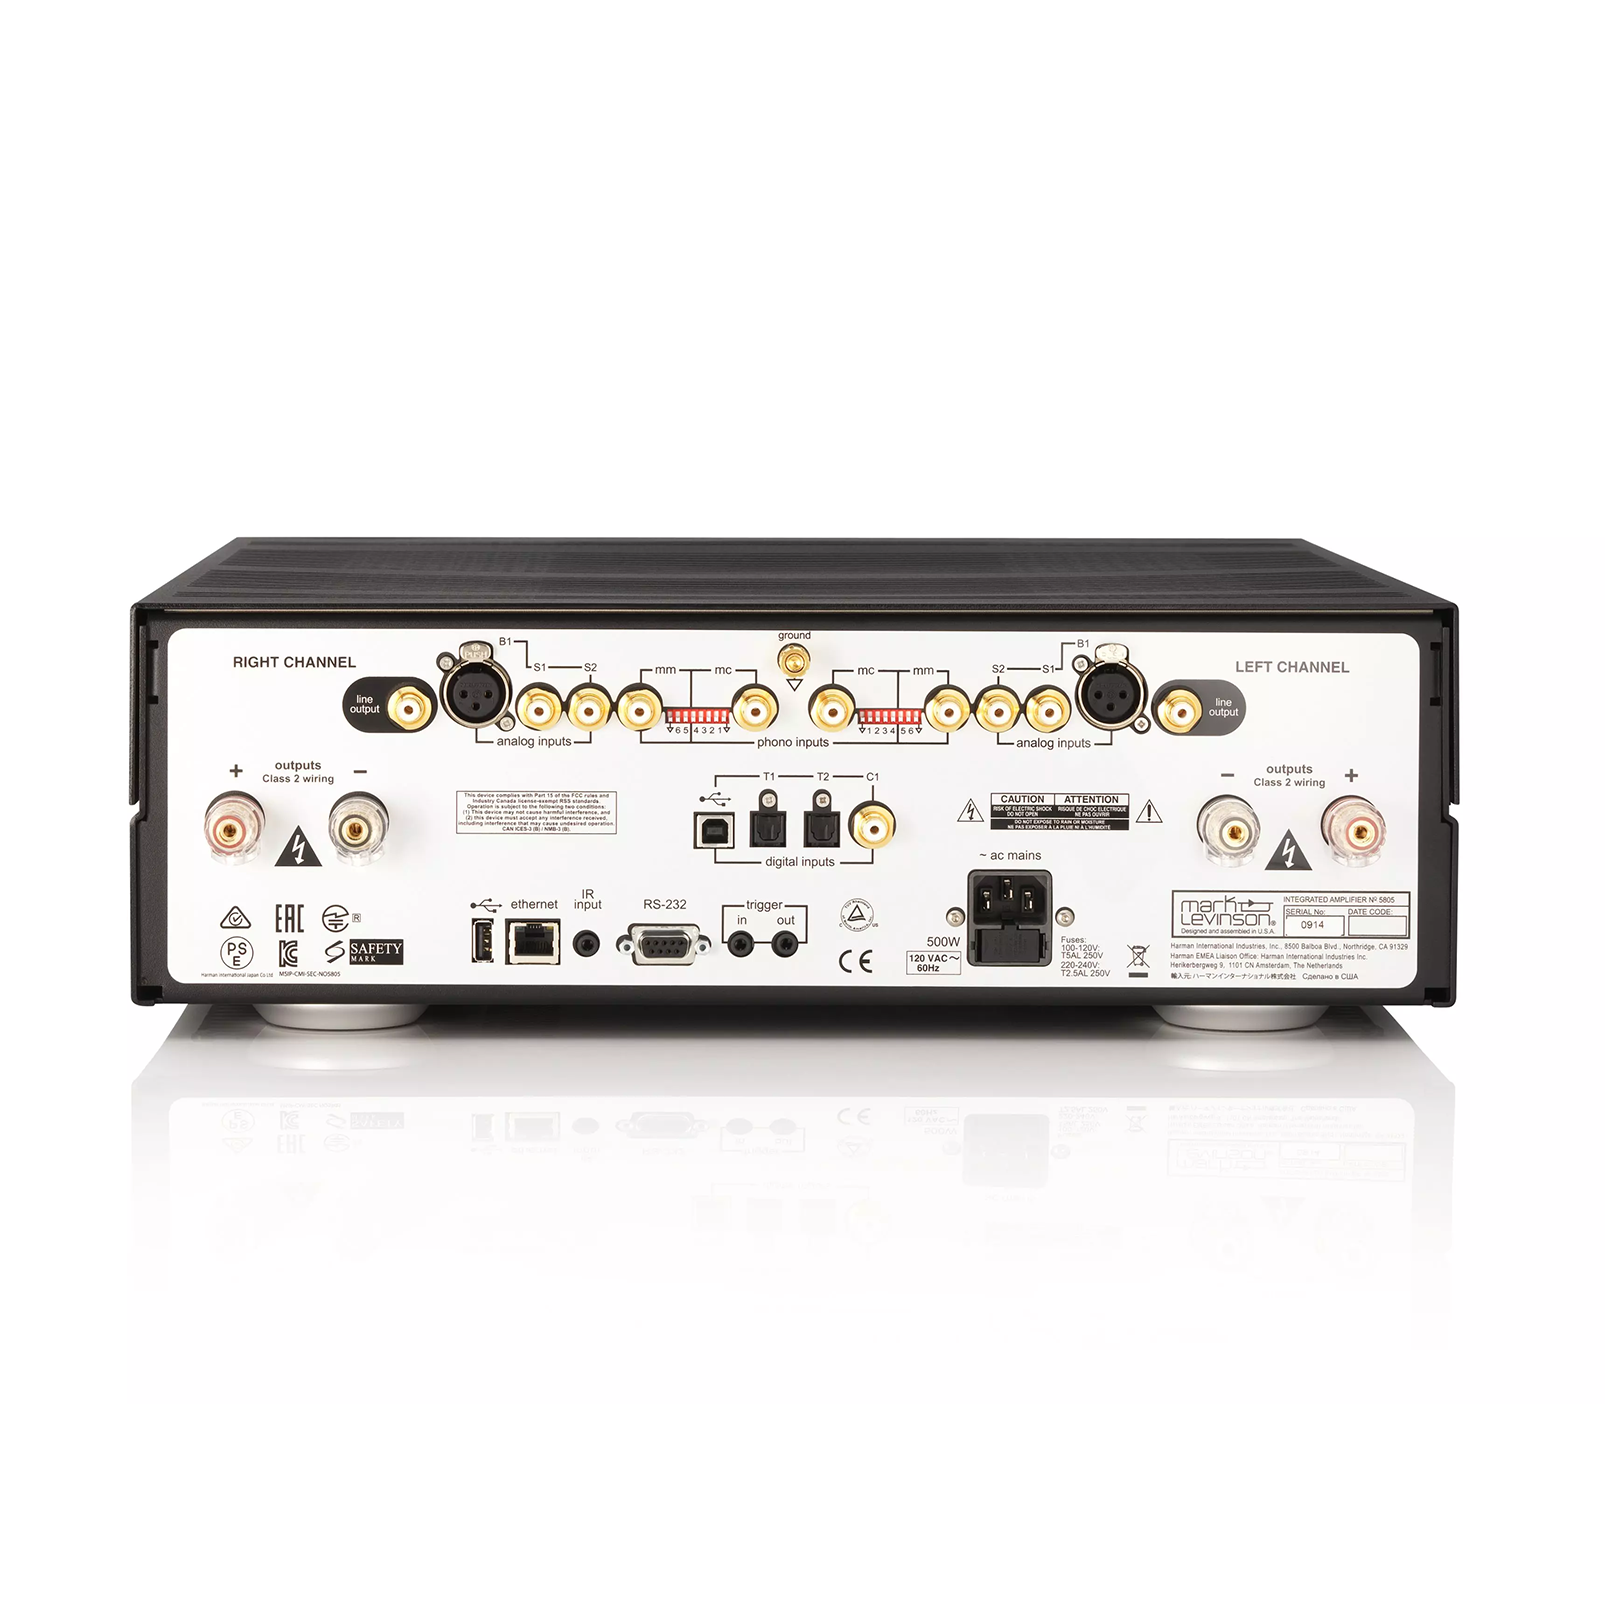 № 5805 - Black / Silver - Integrated Amplifier for Digital and Analog sources - Back